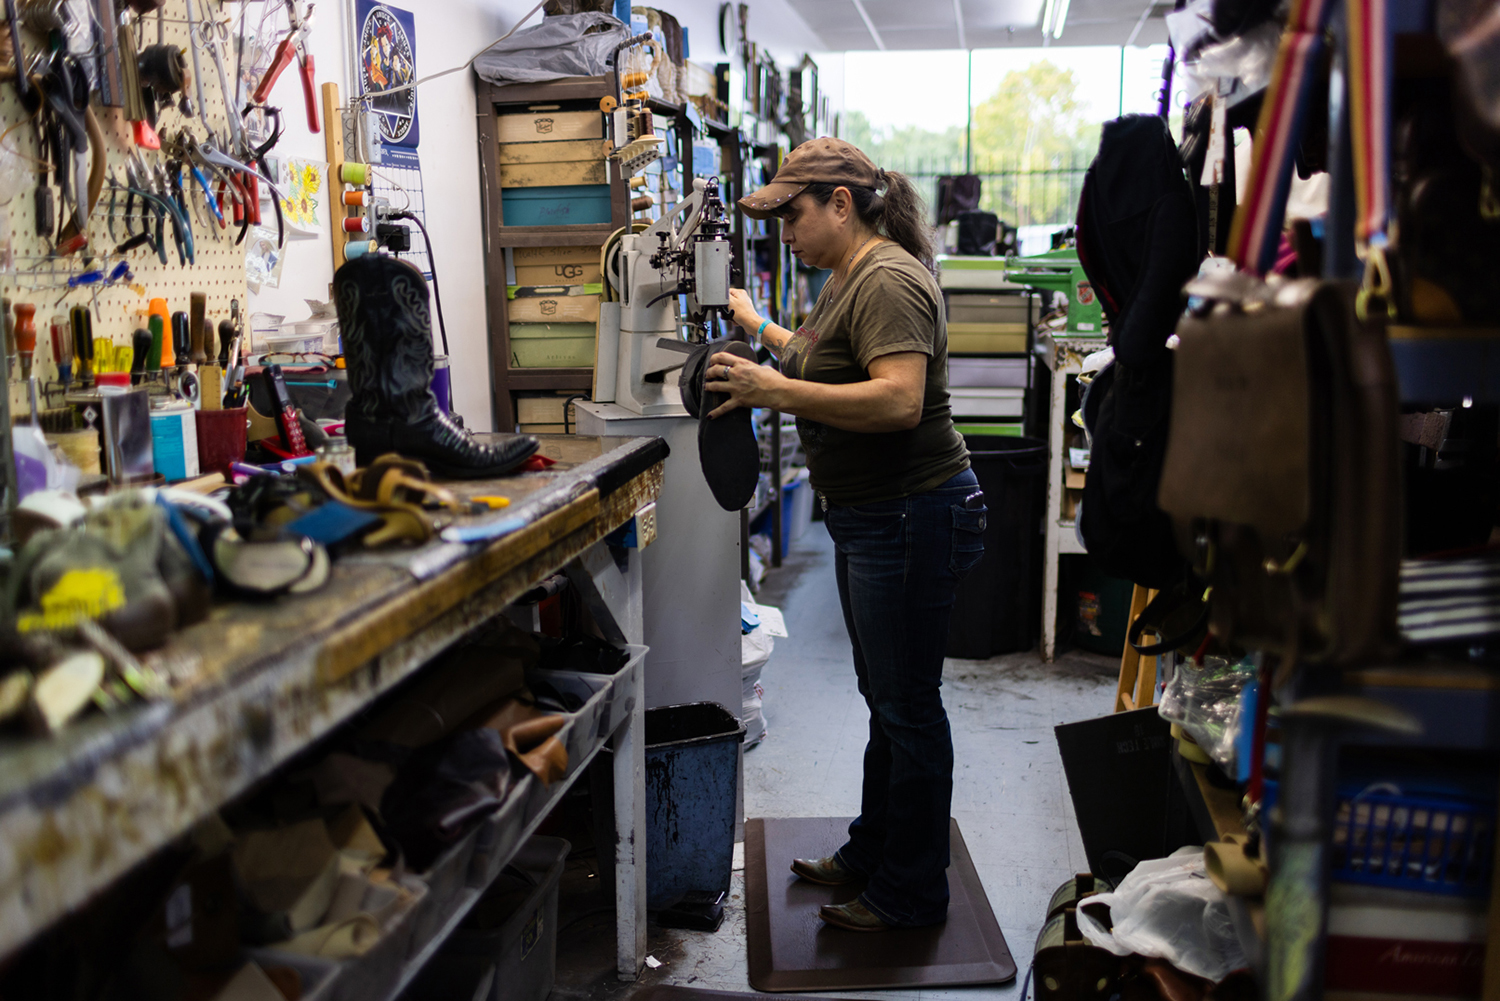 Lisa Klein repairs a leather boot at Walt’s Shoe Shop in Willowbrook. Klein has been running the repair shop since her husband died in 2018.